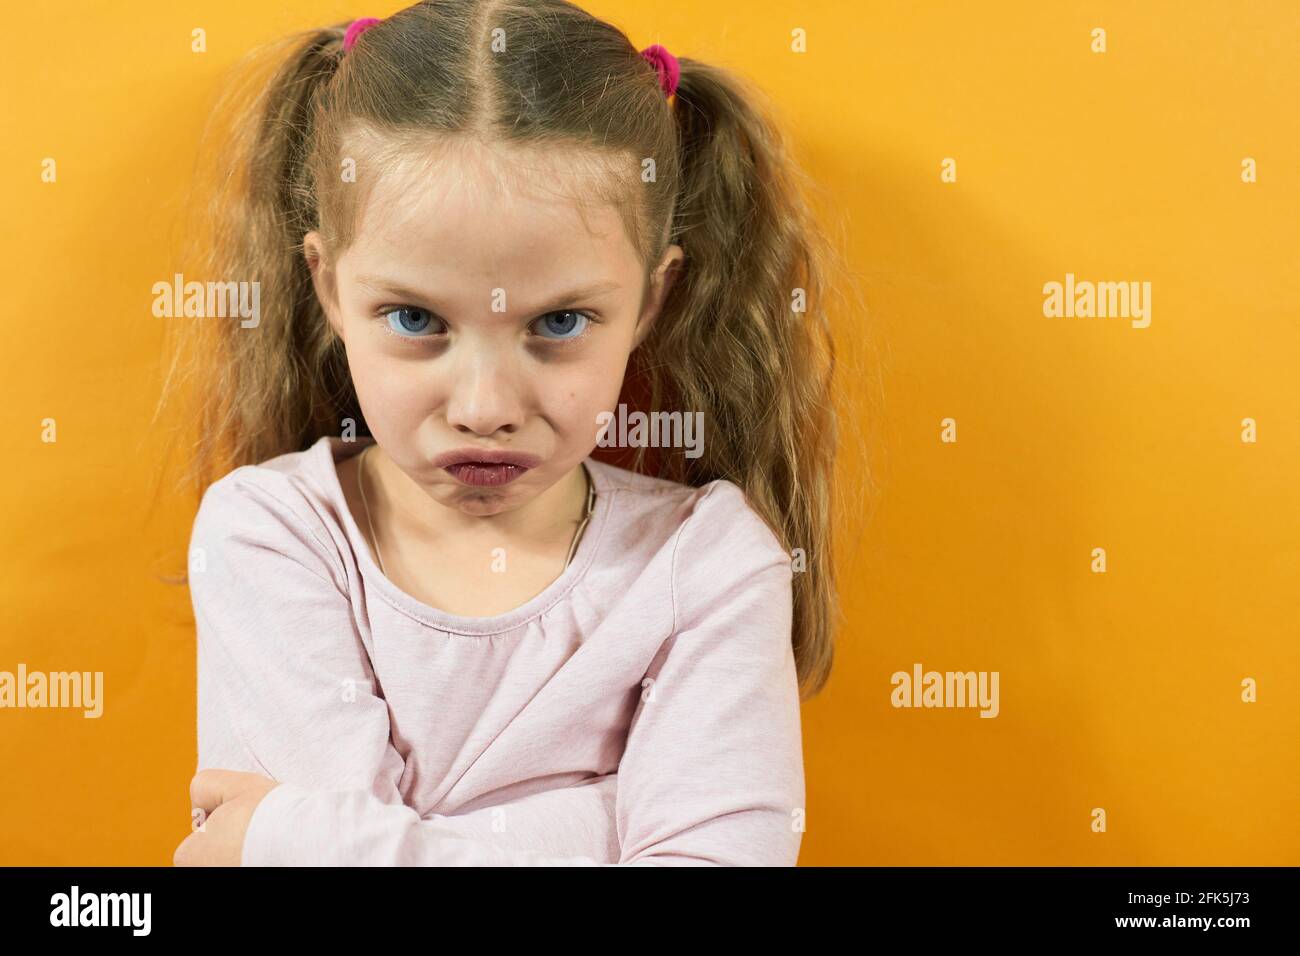 portrait of an angry little girl on a yellow background, emotions in children. Stock Photo